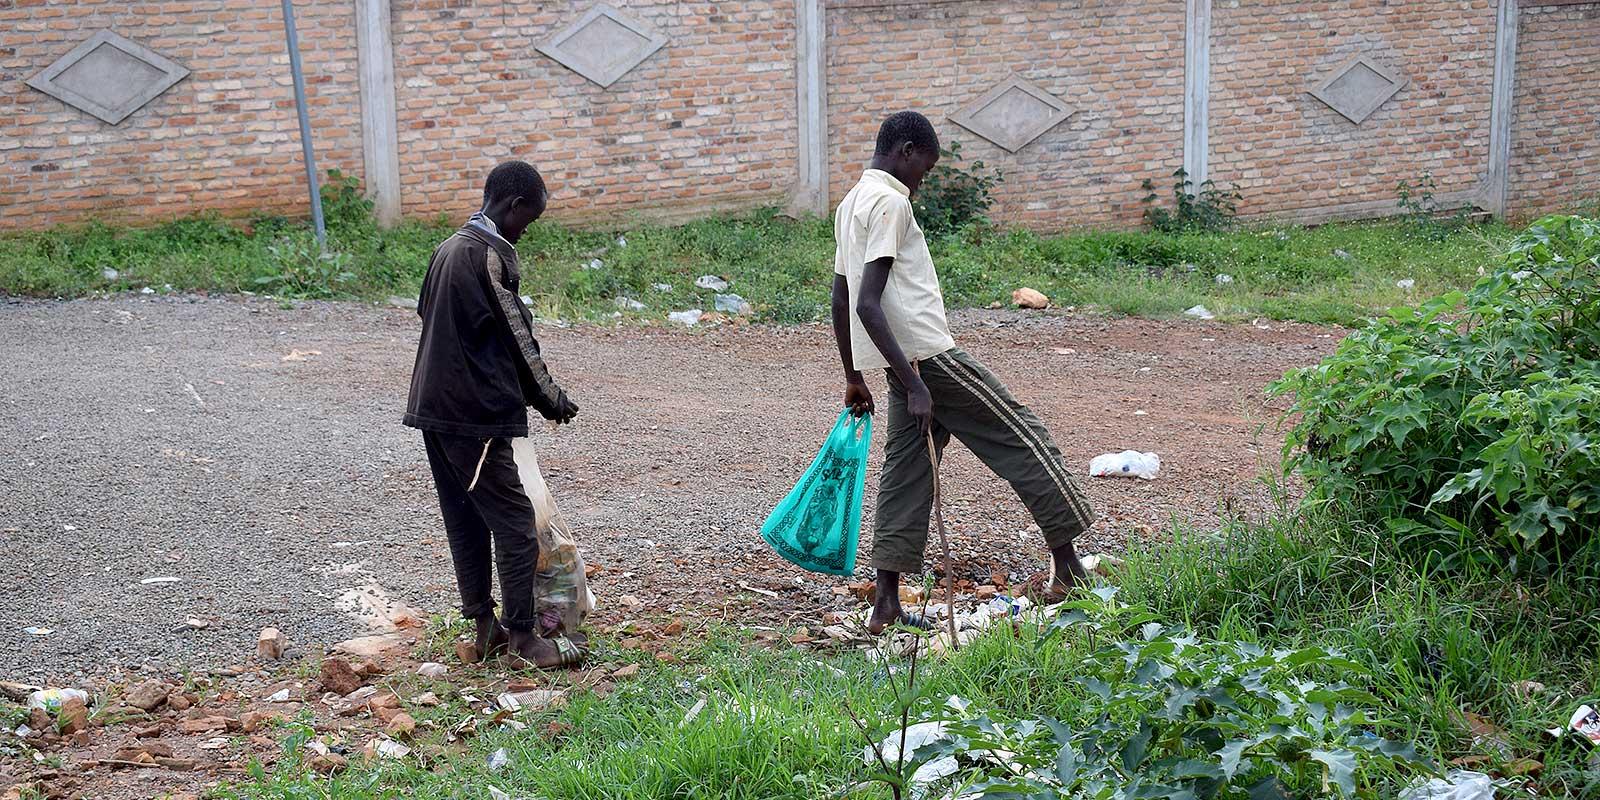 two boys collecting litter